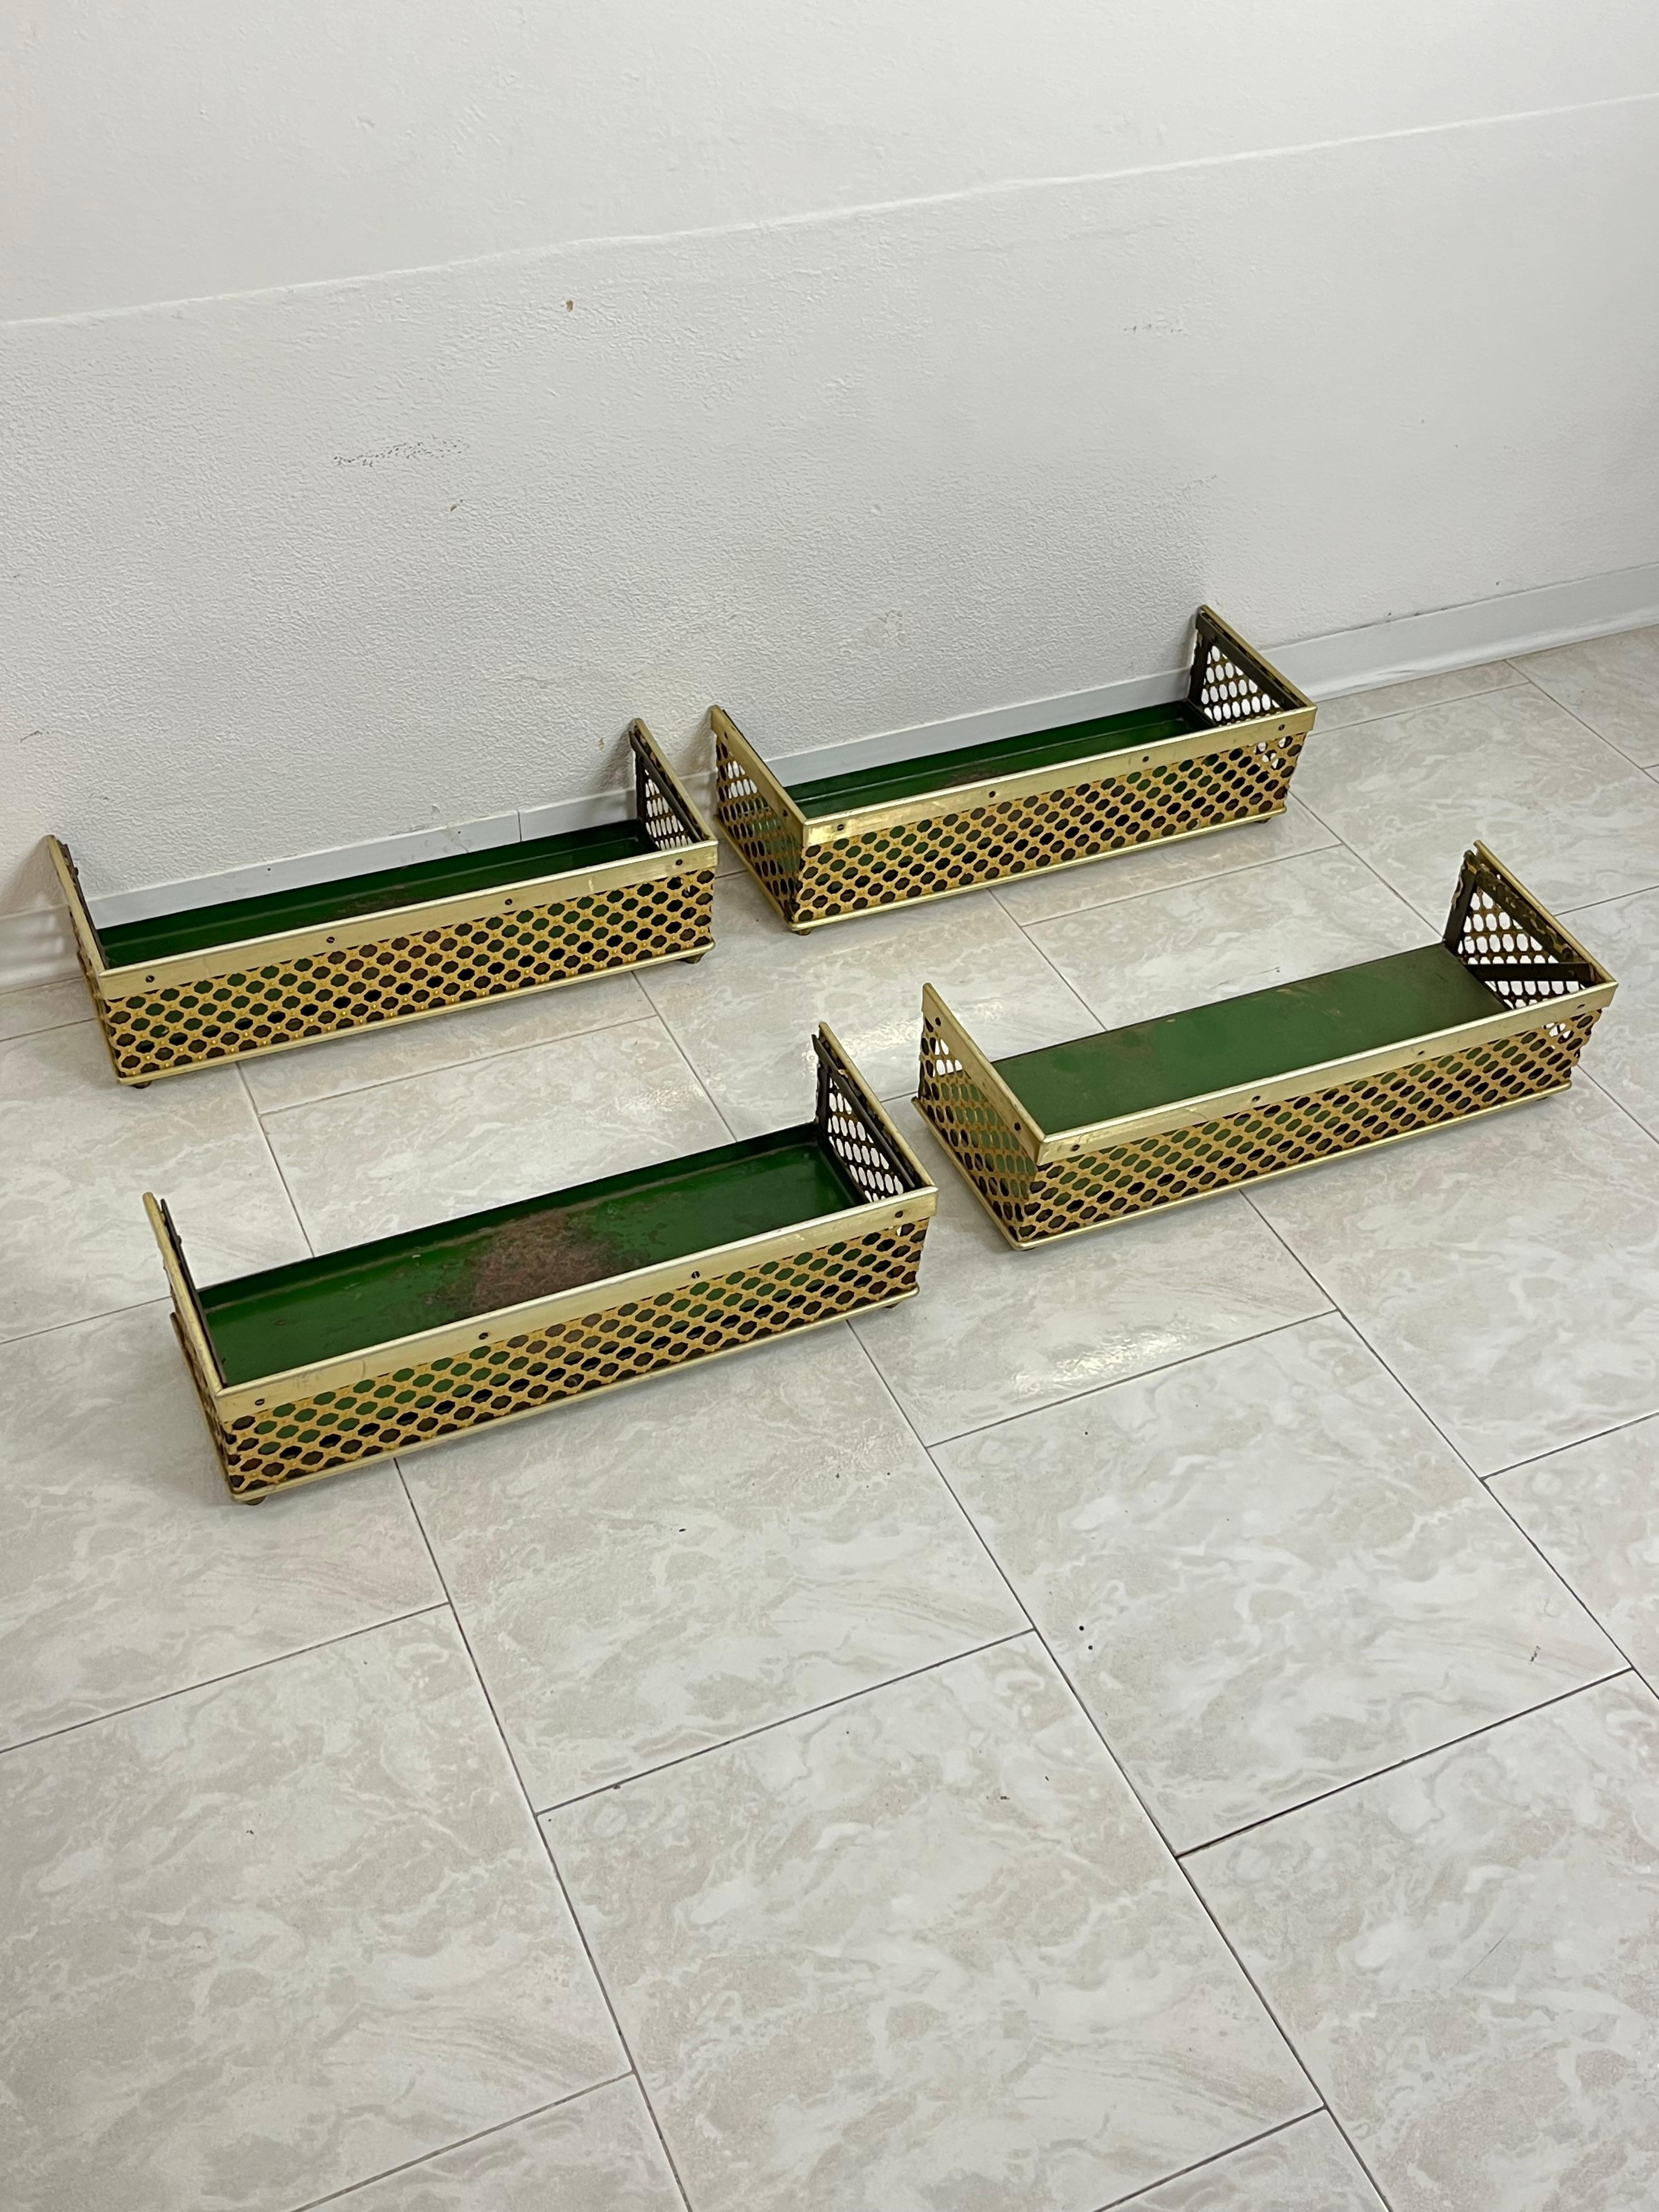 Set of 4 Mid-Century brass-covered planters, attributed to Gio Ponti 1950s.Found in a noble apartment, they have a metal structure covered with a brass mesh.
Intact and in good condition, small signs of aging.